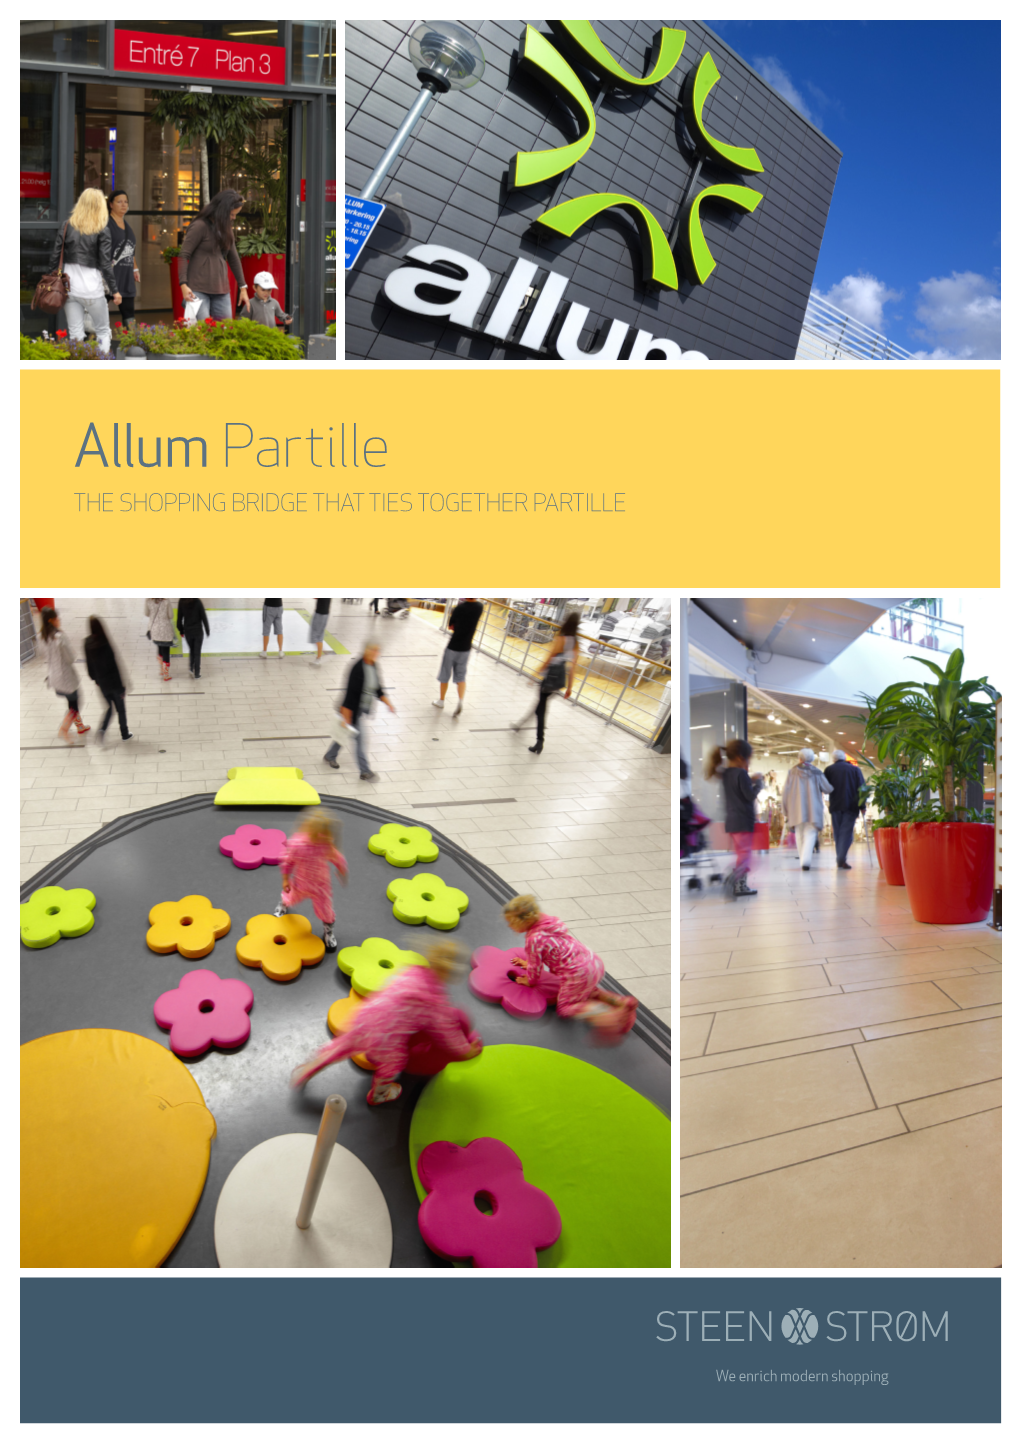 Allum Partille the SHOPPING BRIDGE THAT TIES TOGETHER PARTILLE MARKET AREA Primary Area Secondary Area Tertiary Area